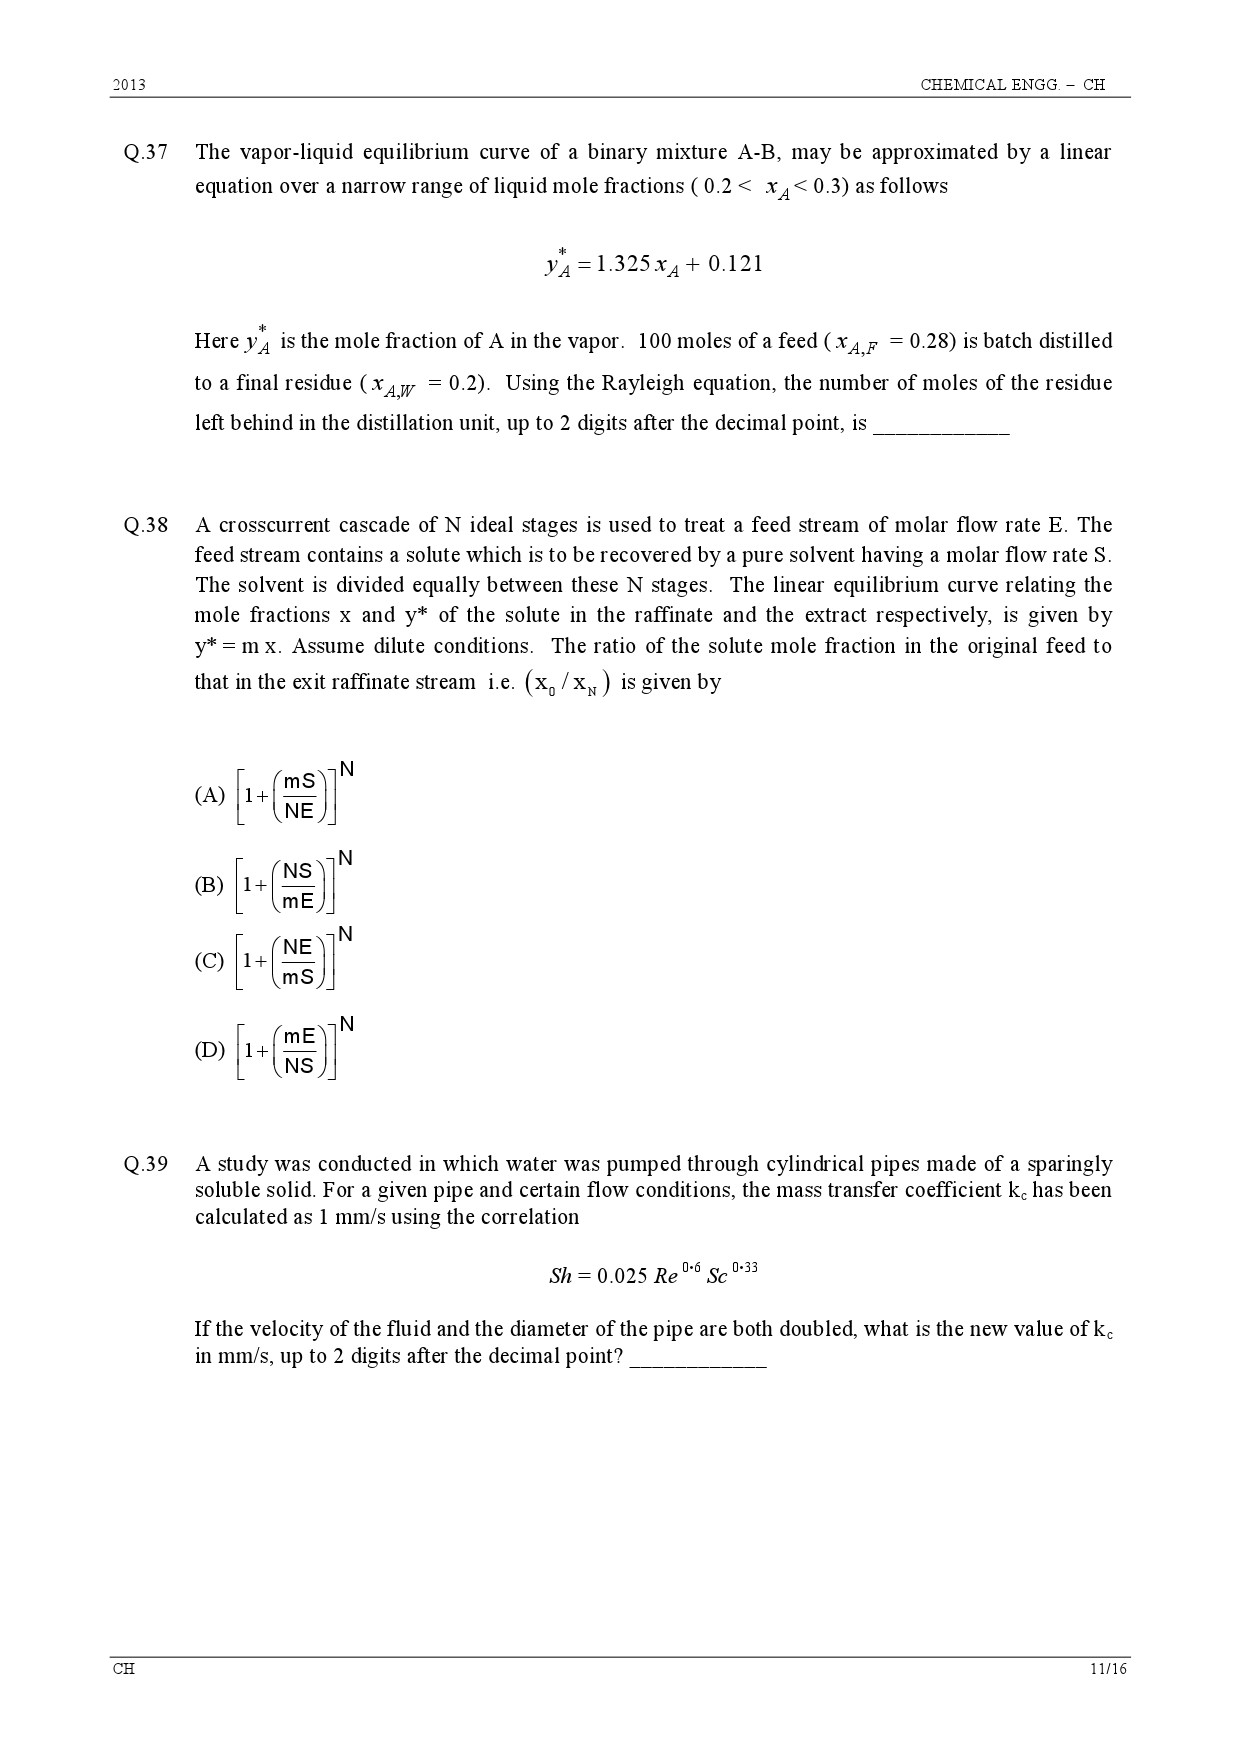 GATE Exam Question Paper 2013 Chemical Engineering 11